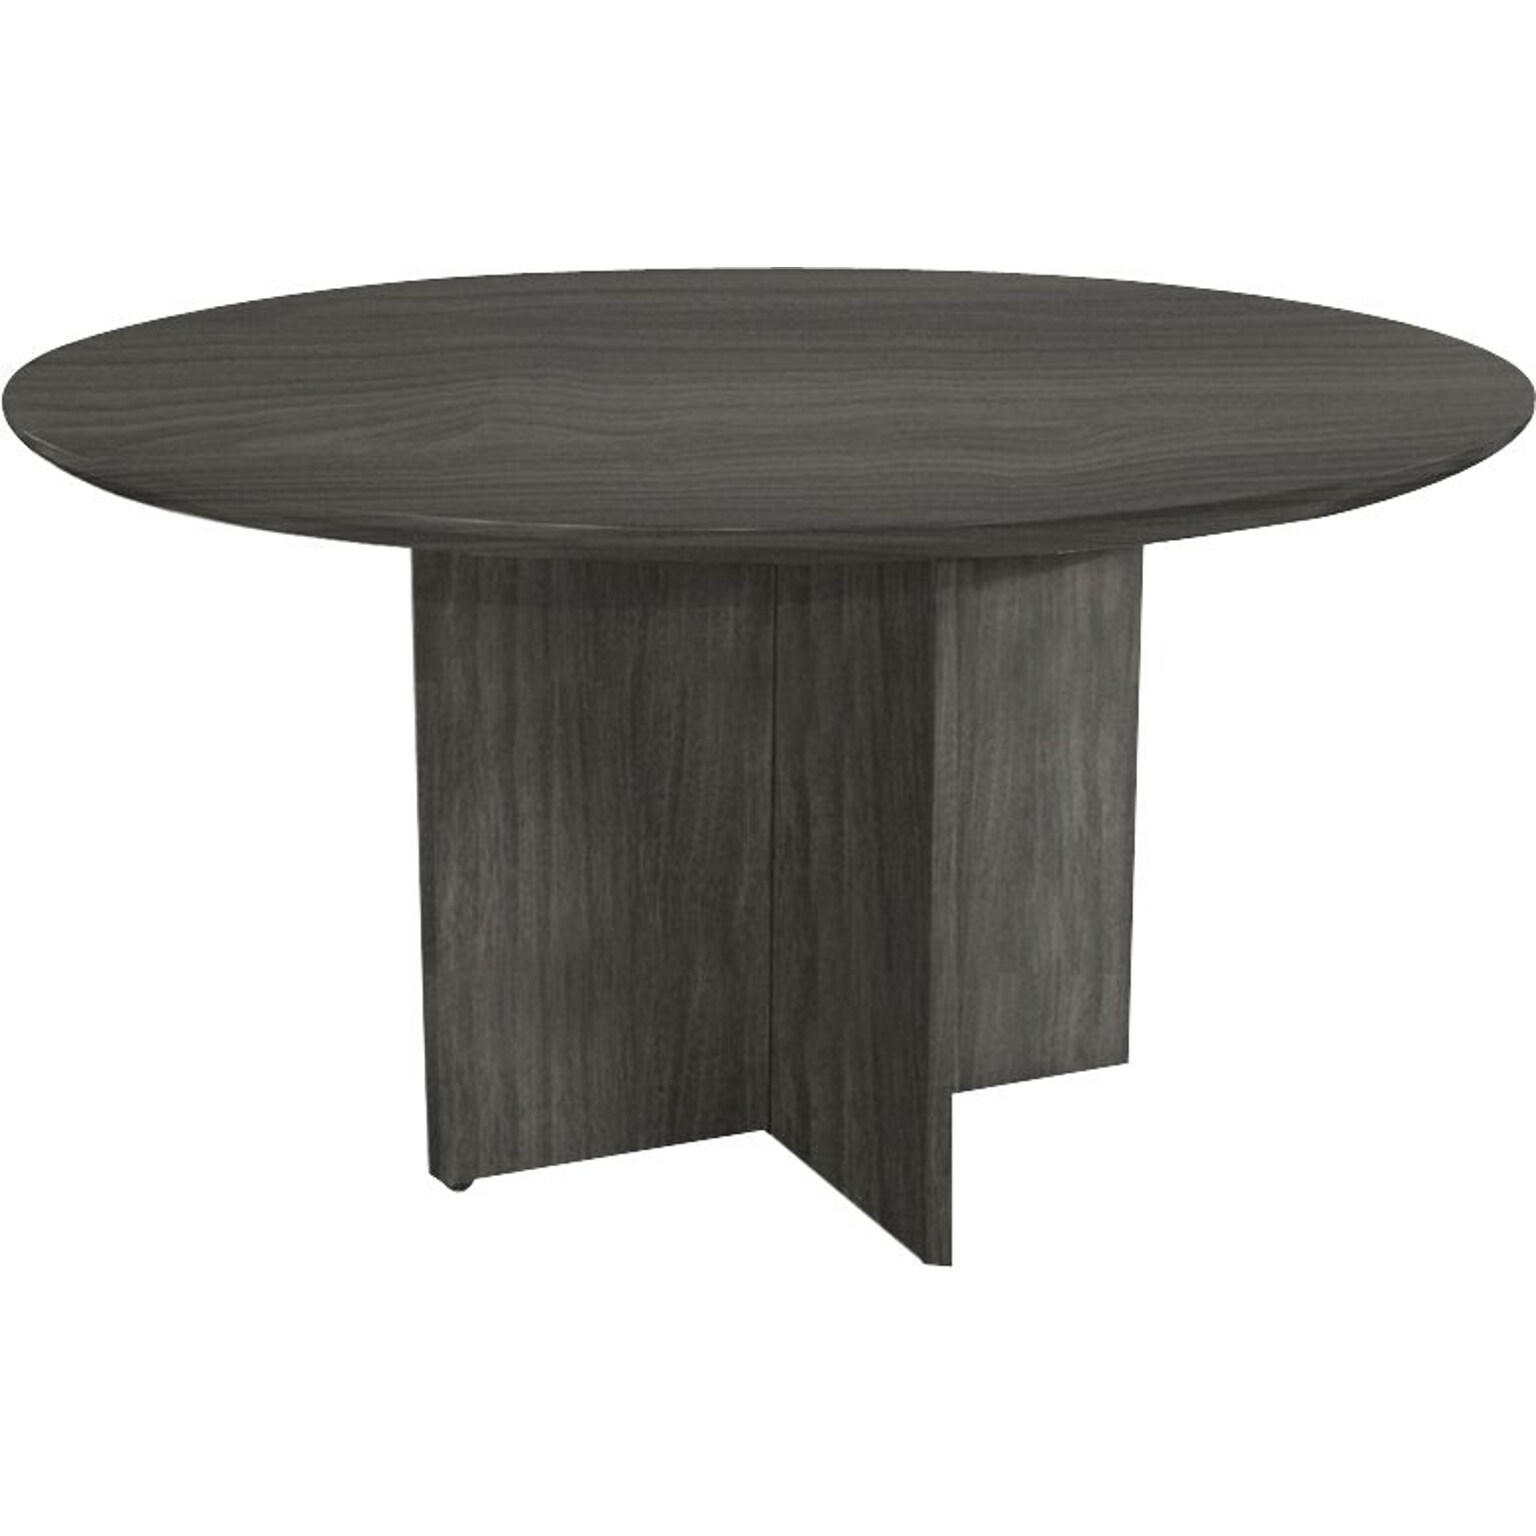 Safco Medina Round Conference Table, Gray Steel, 29 1/2H x 48dia.